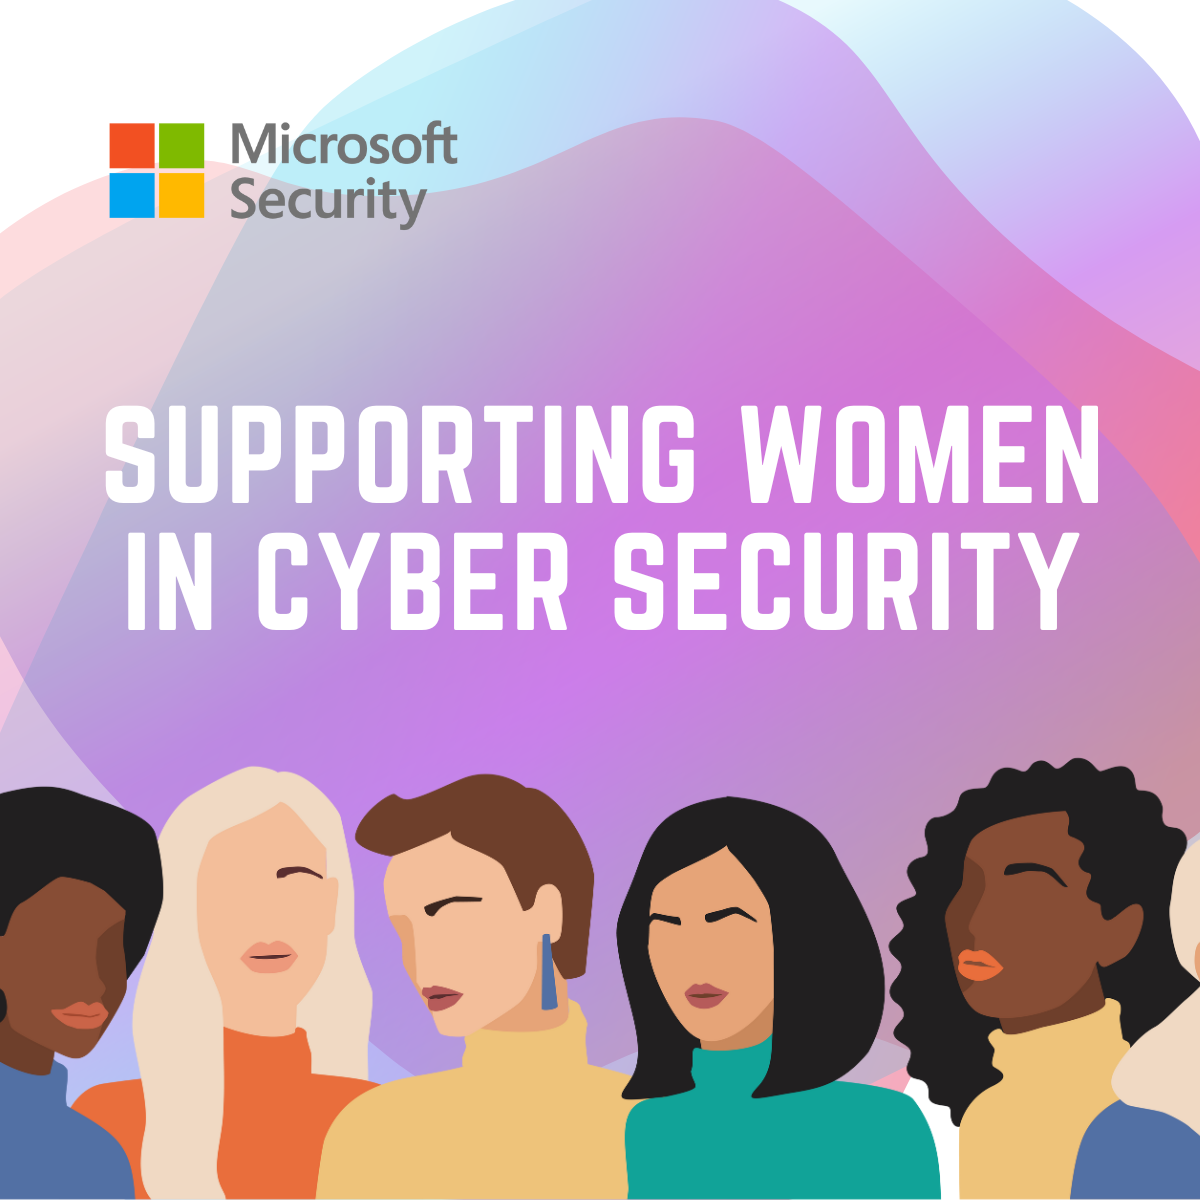 International Women’s Day: The power of diversity to build stronger cybersecurity teams